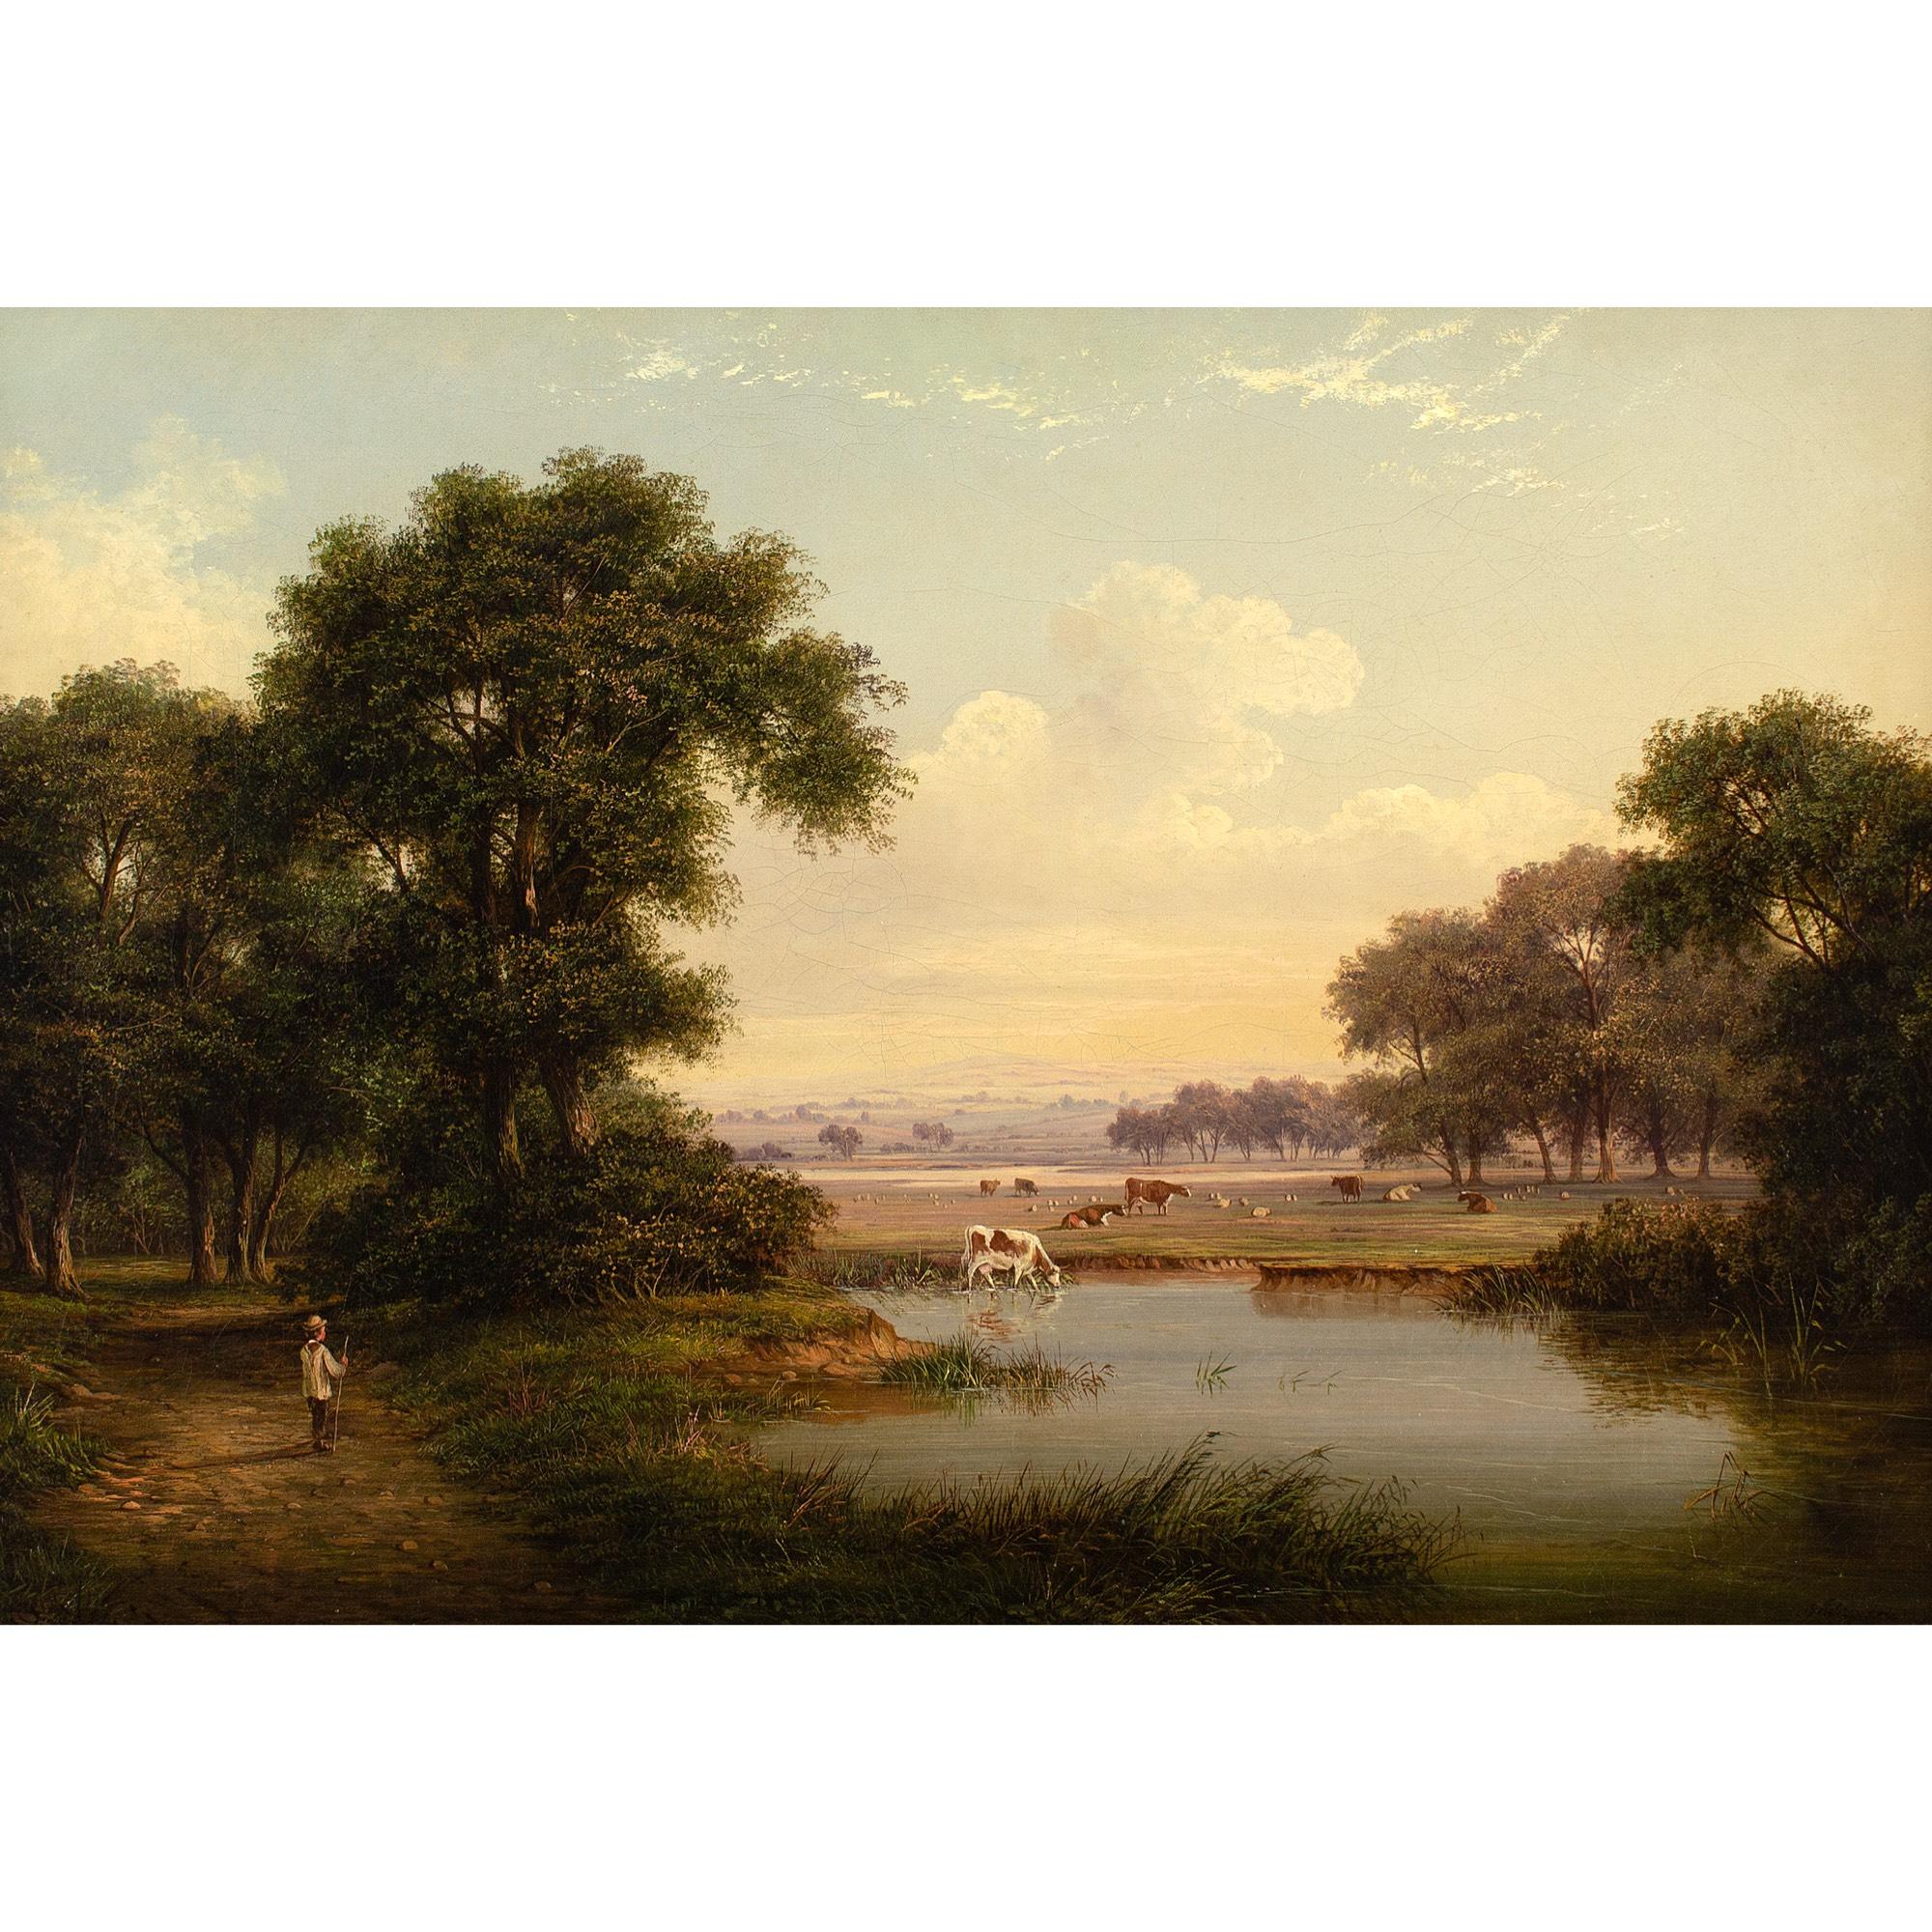 This charming 19th-century oil painting by British artist Walter Heath Williams (fl.1841-1876) depicts a pastoral scene with cattle, pond, and figure.

Under a blissful sky with occasional drifting clouds, several cattle graze and take water. It’s